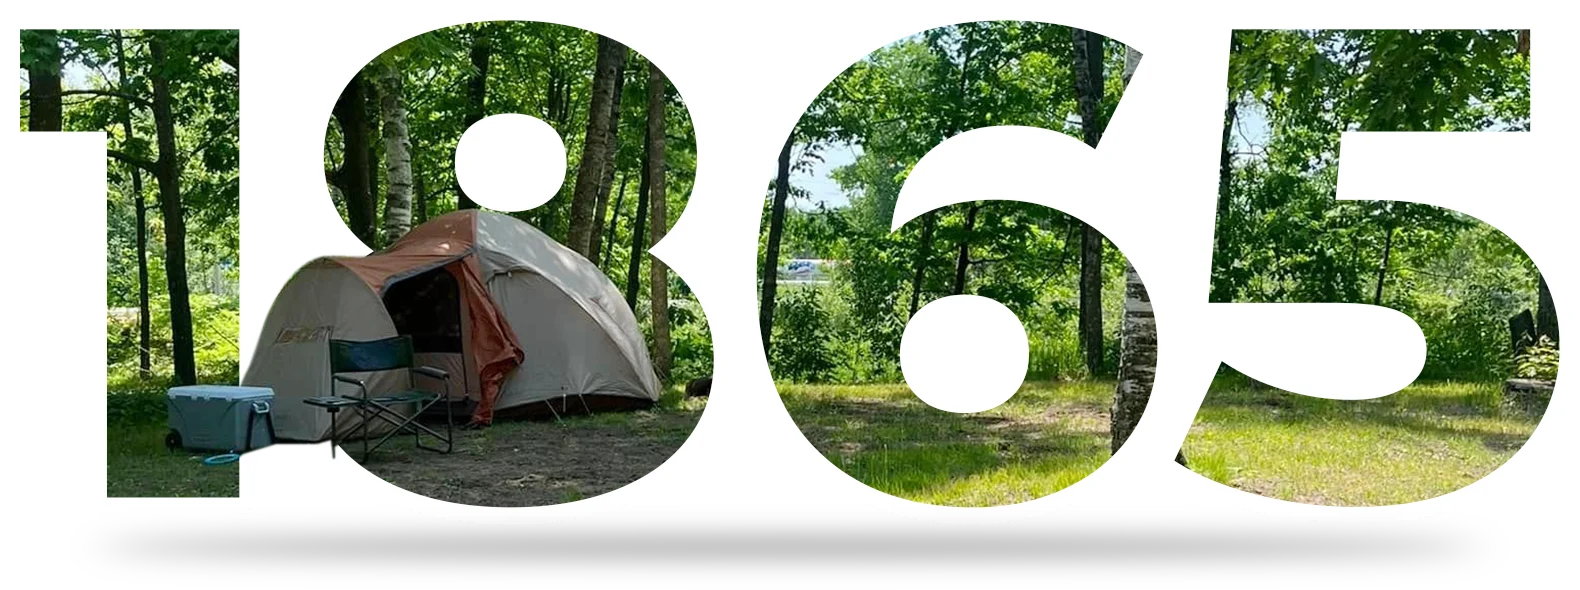 A number of tents in the woods with trees